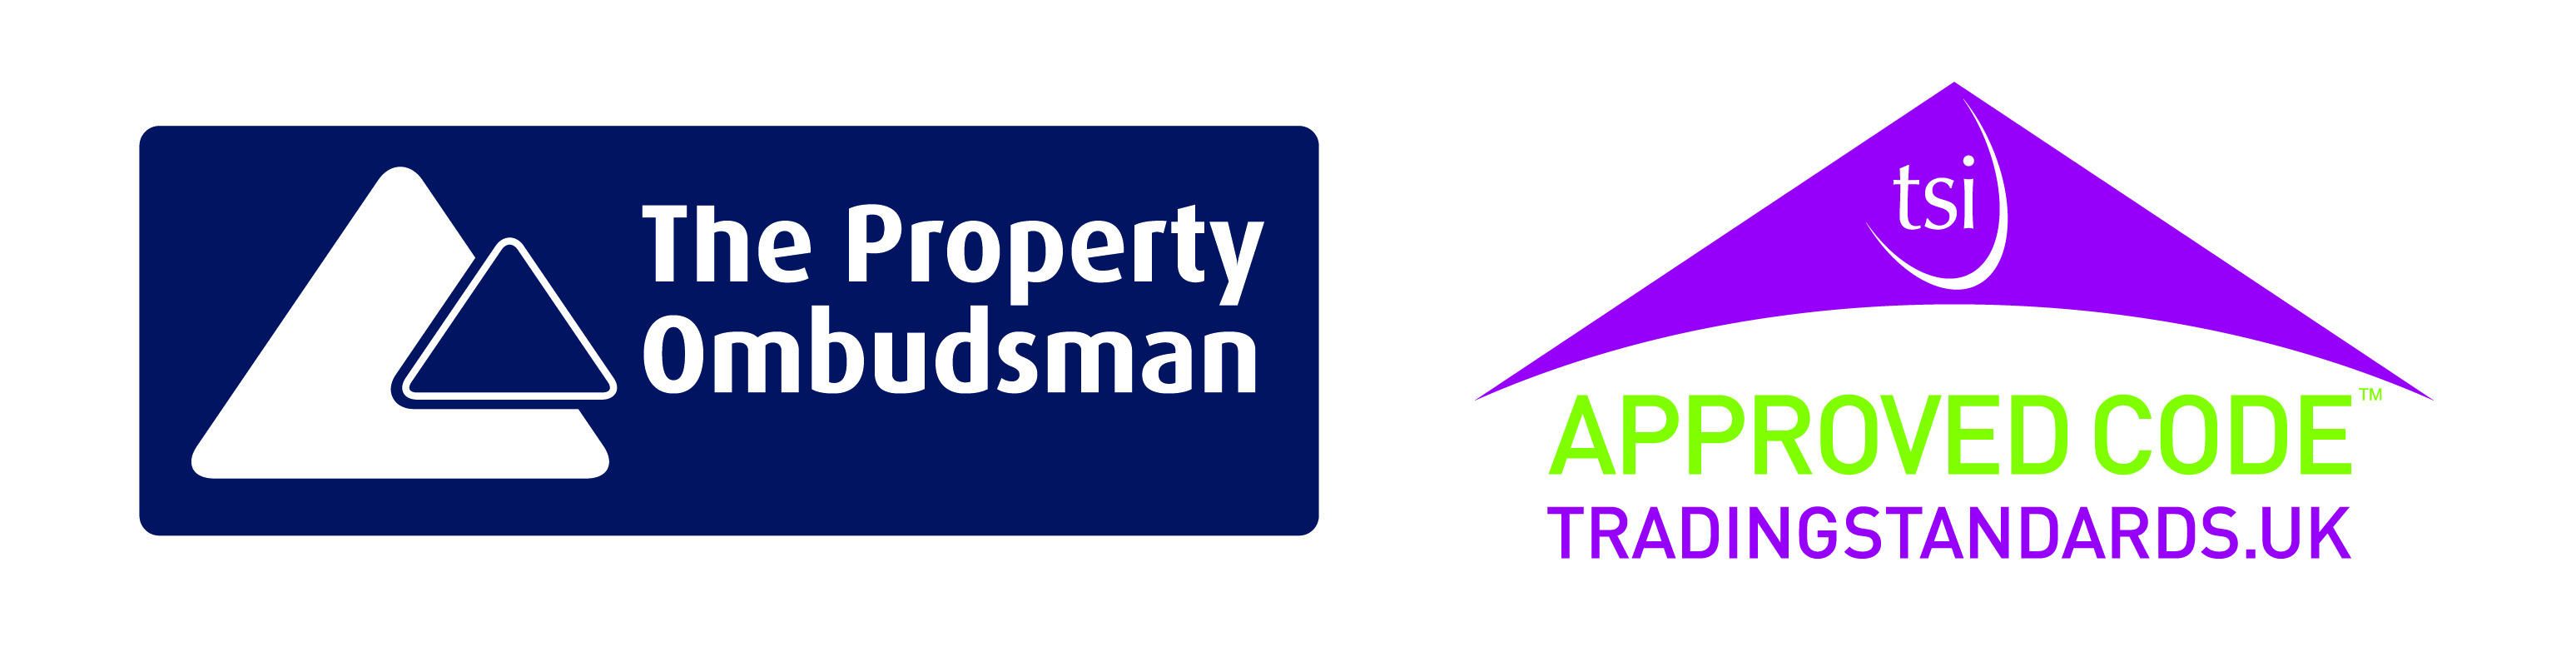 W Humphries Inc. is registered with the Property Ombudsman.